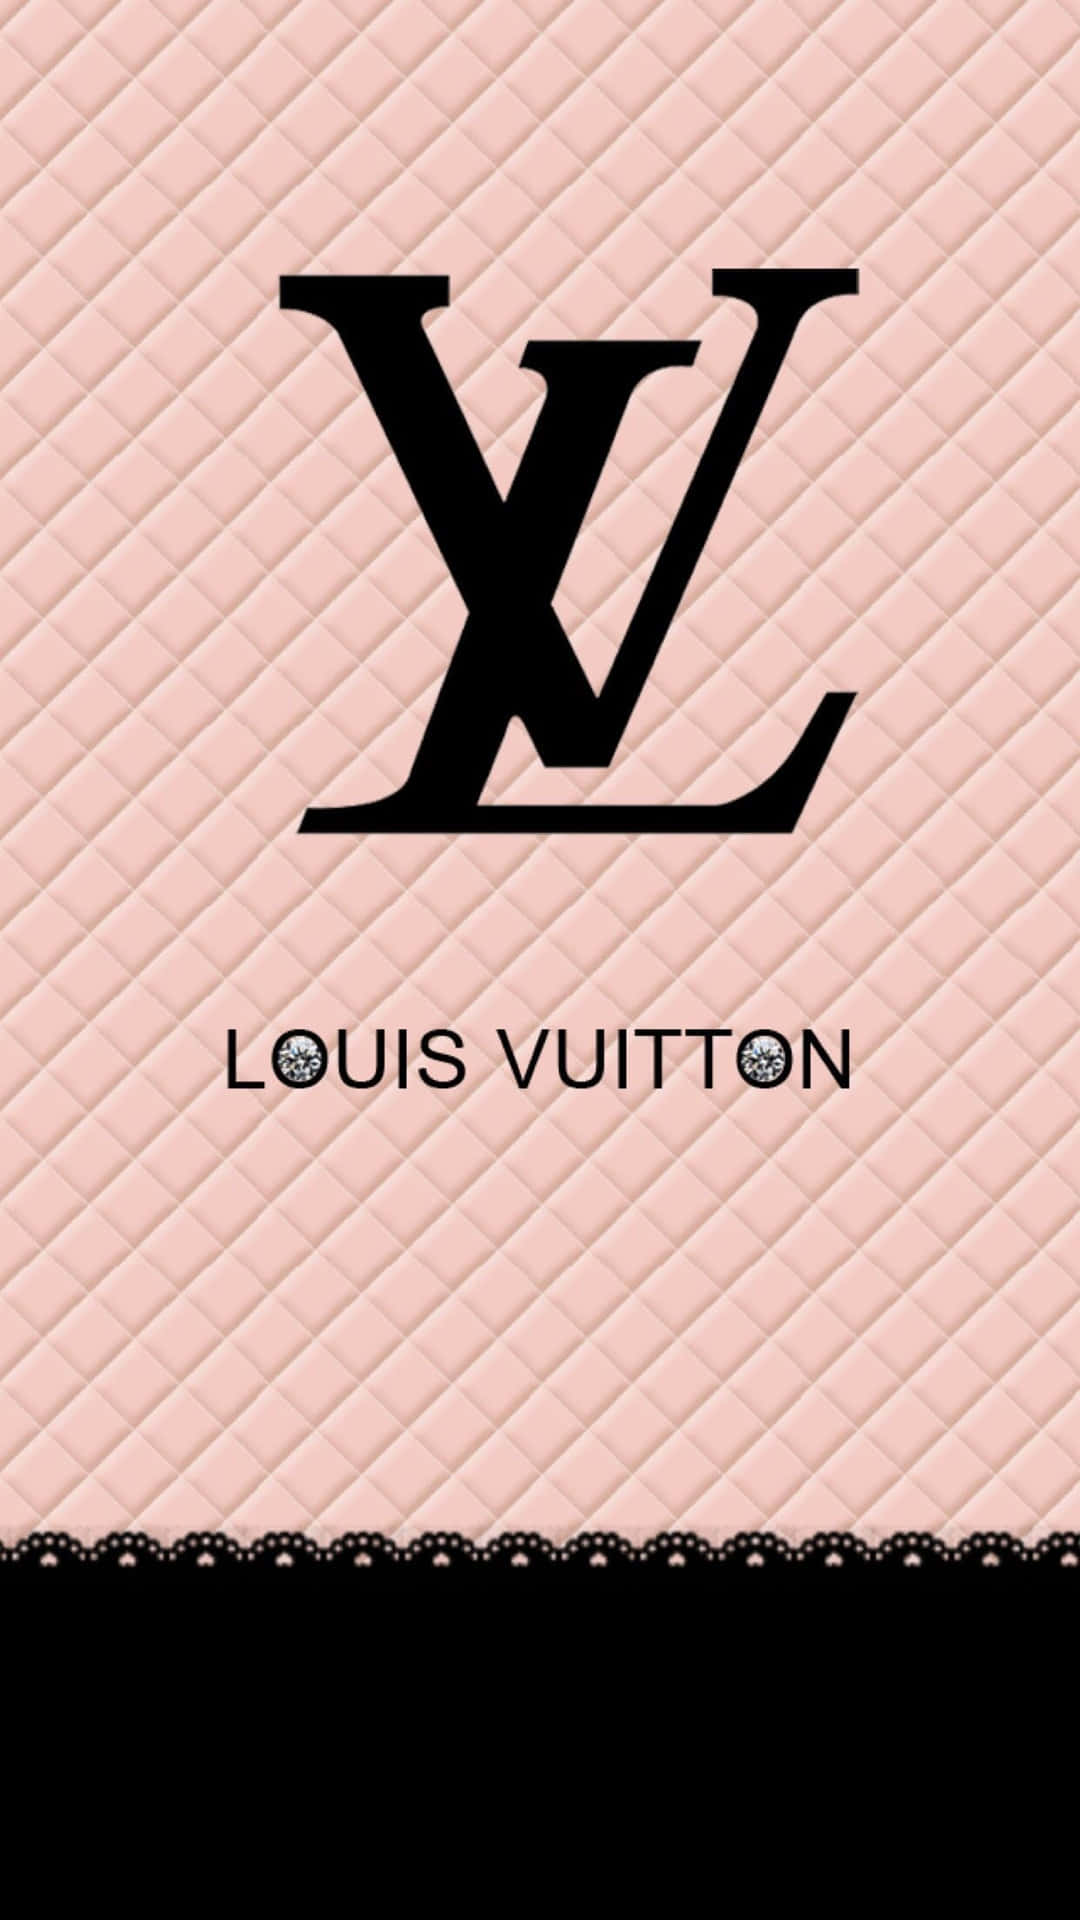 Download Make a statement this season with Louis Vuitton's gorgeous pink  statement pieces. Wallpaper